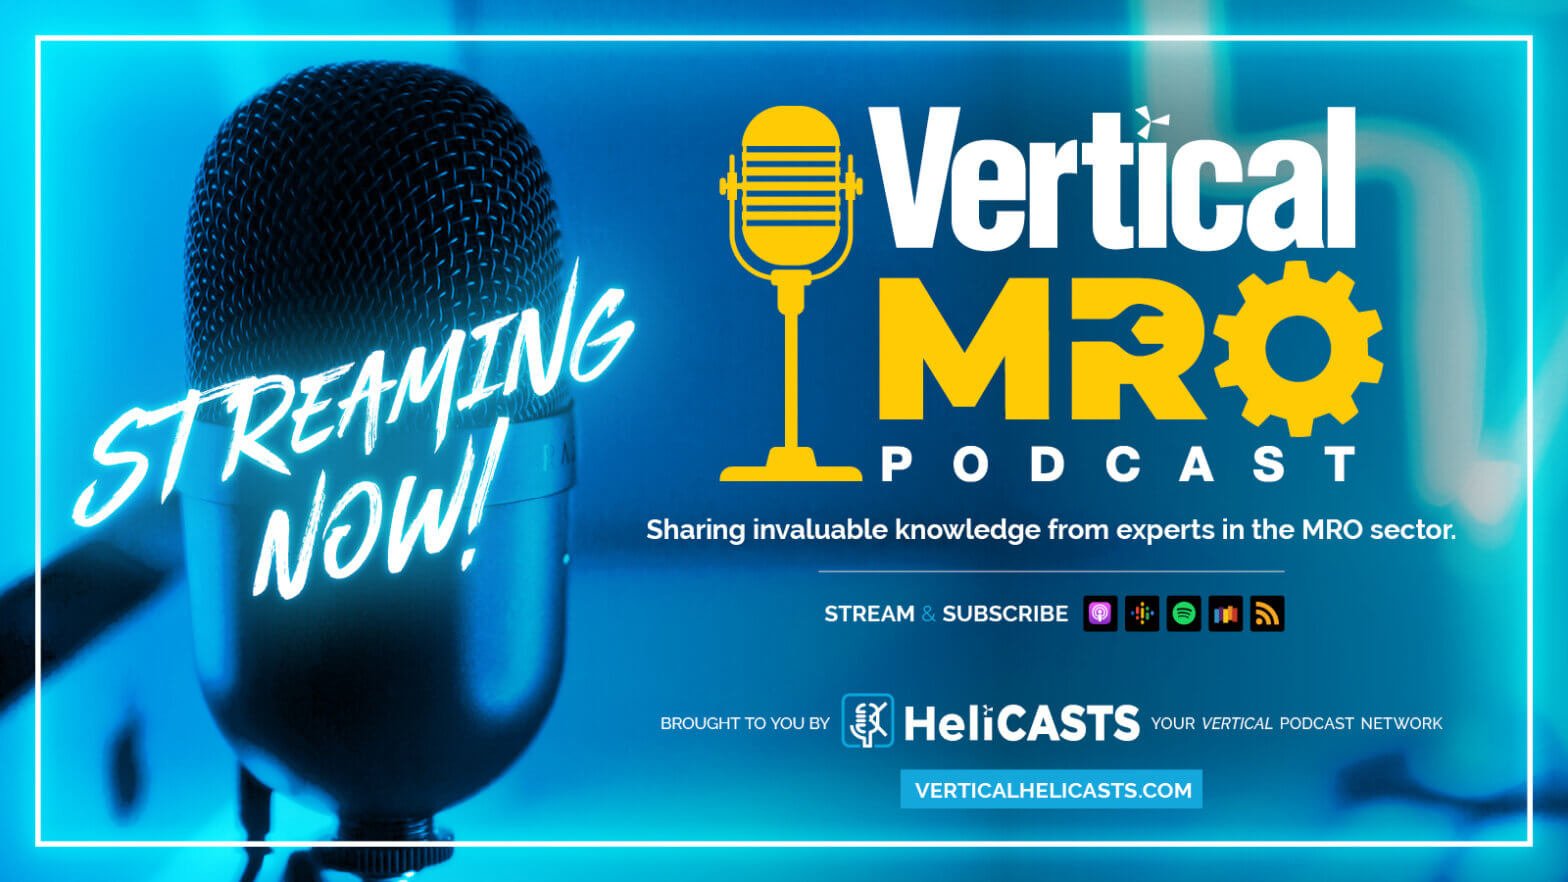 Vertical Helicasts launches Vertical MRO Podcast, streaming now